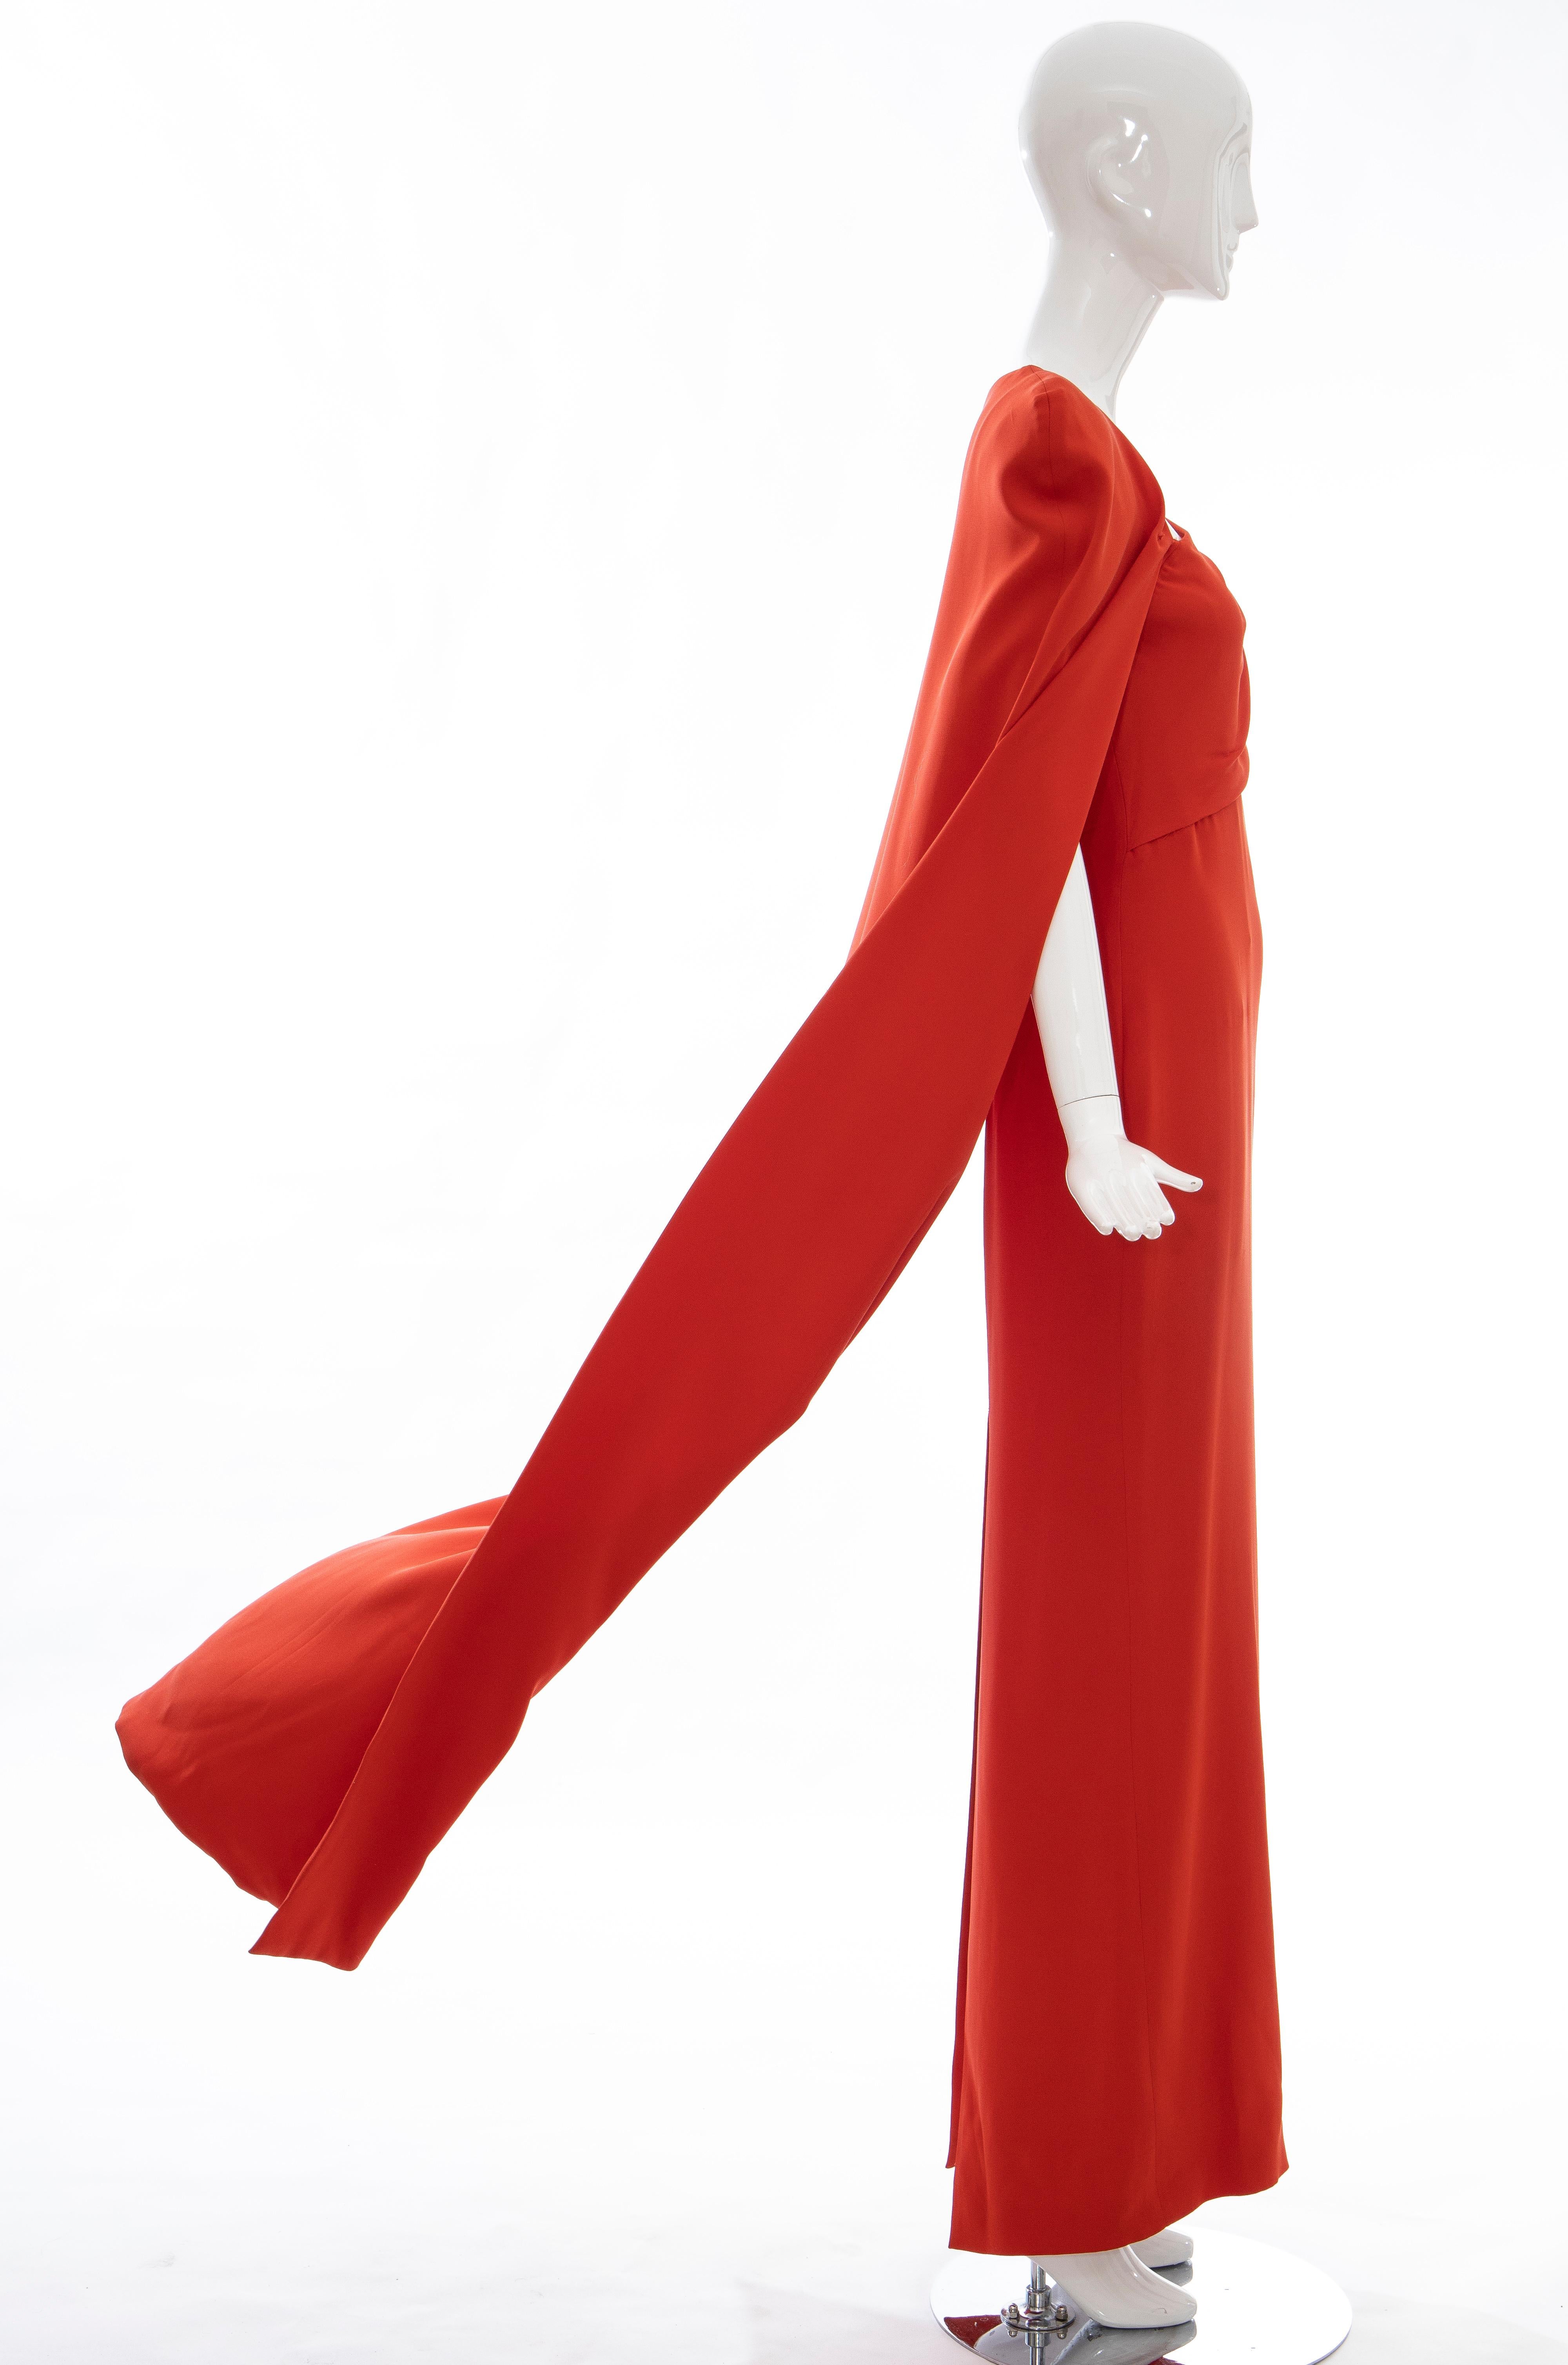 Tom Ford Runway Silk Persimmon Evening Dress With Cape, Fall 2012 5